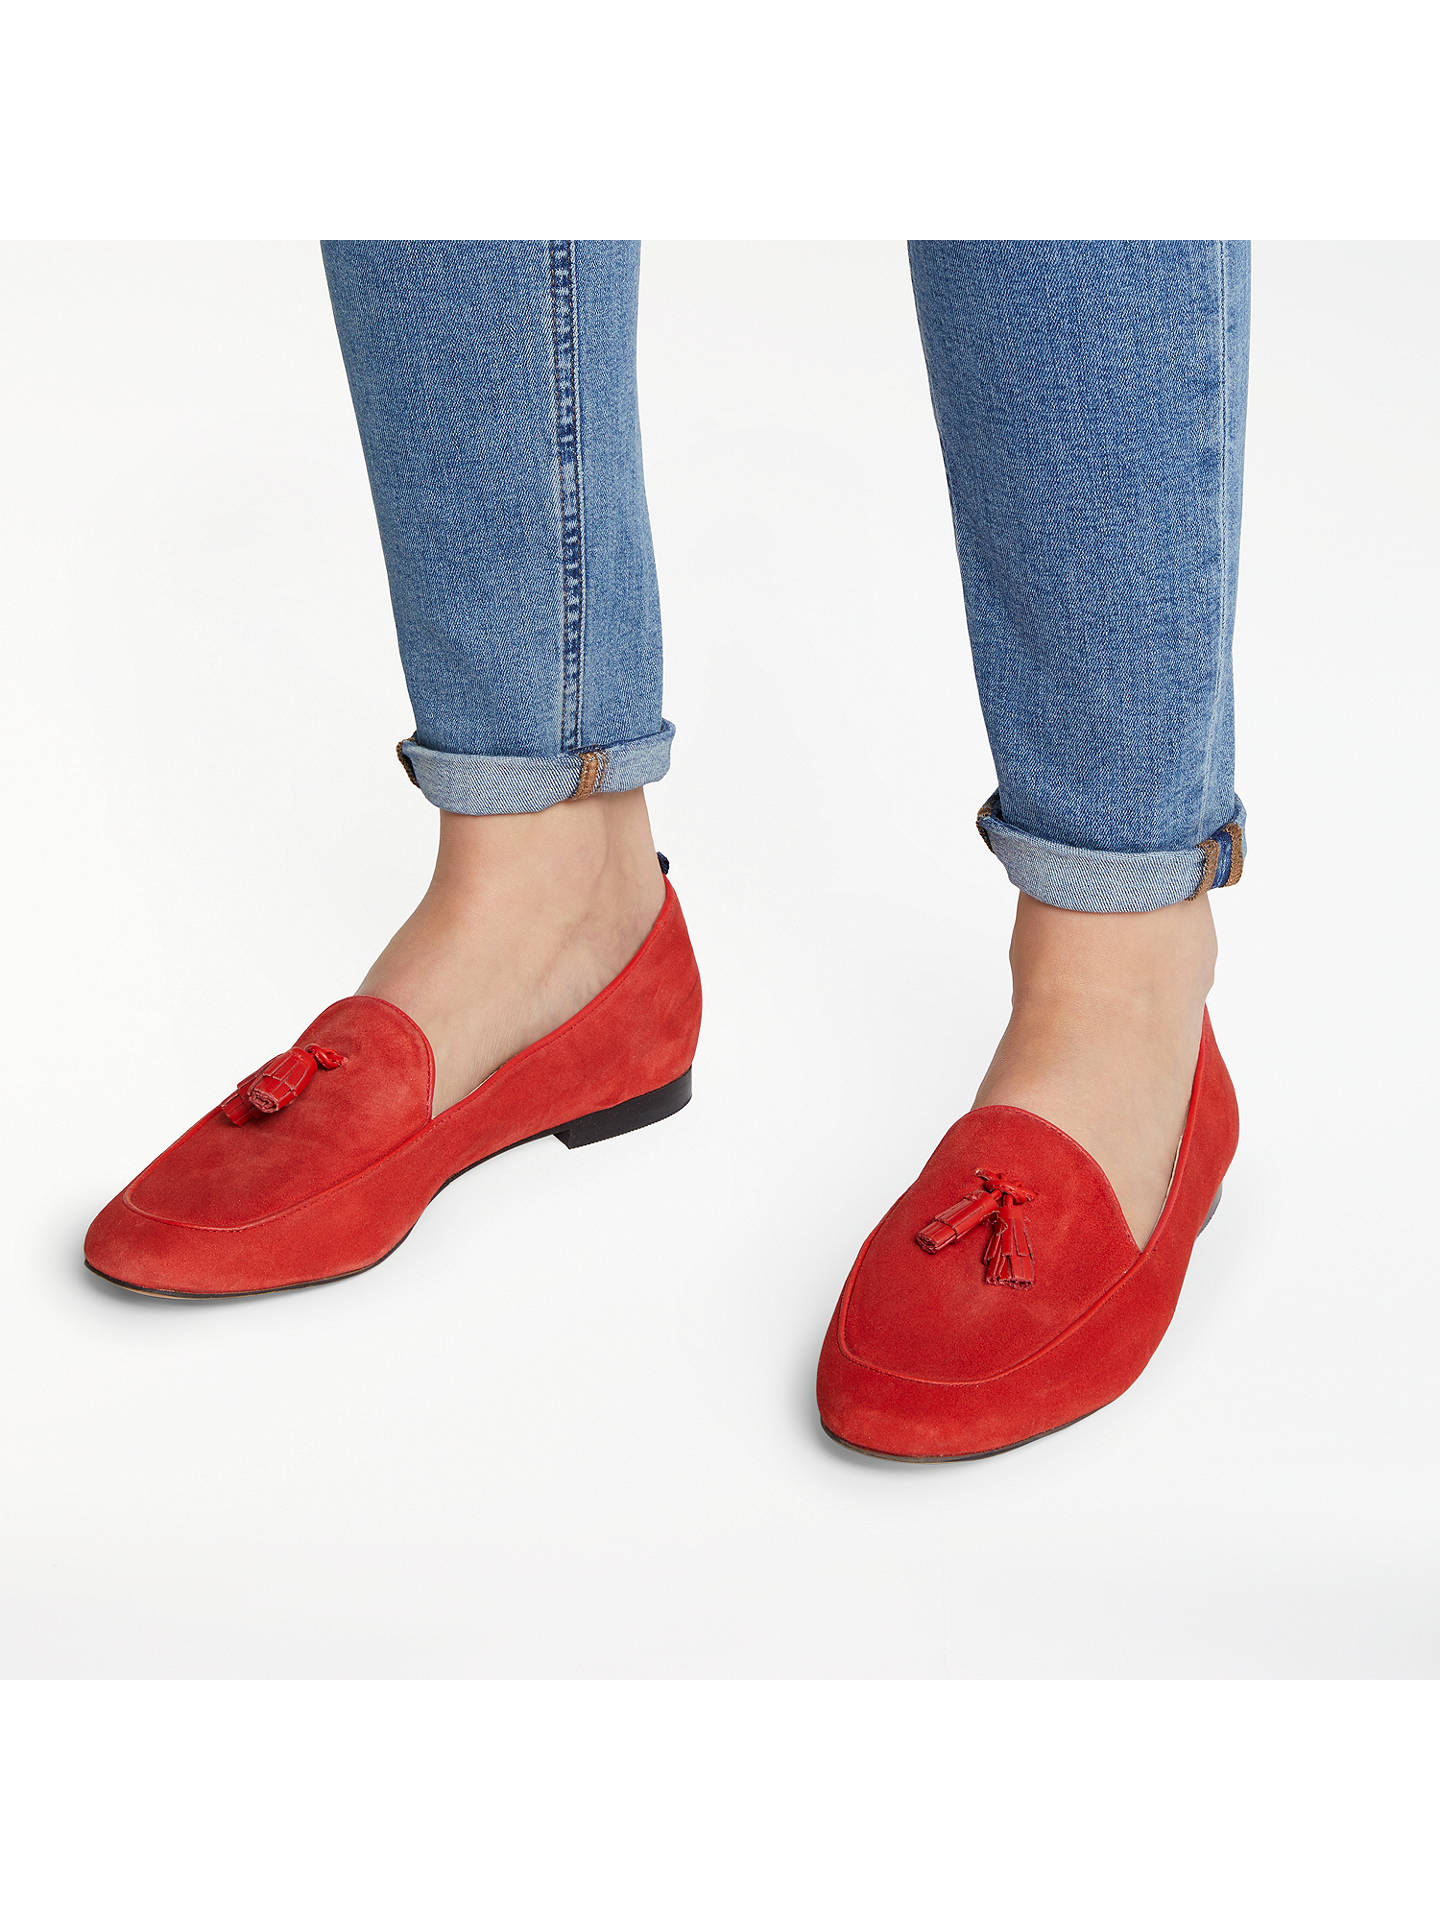 Boden Ines Tassel Loafers, Post Box Red at John Lewis & Partners